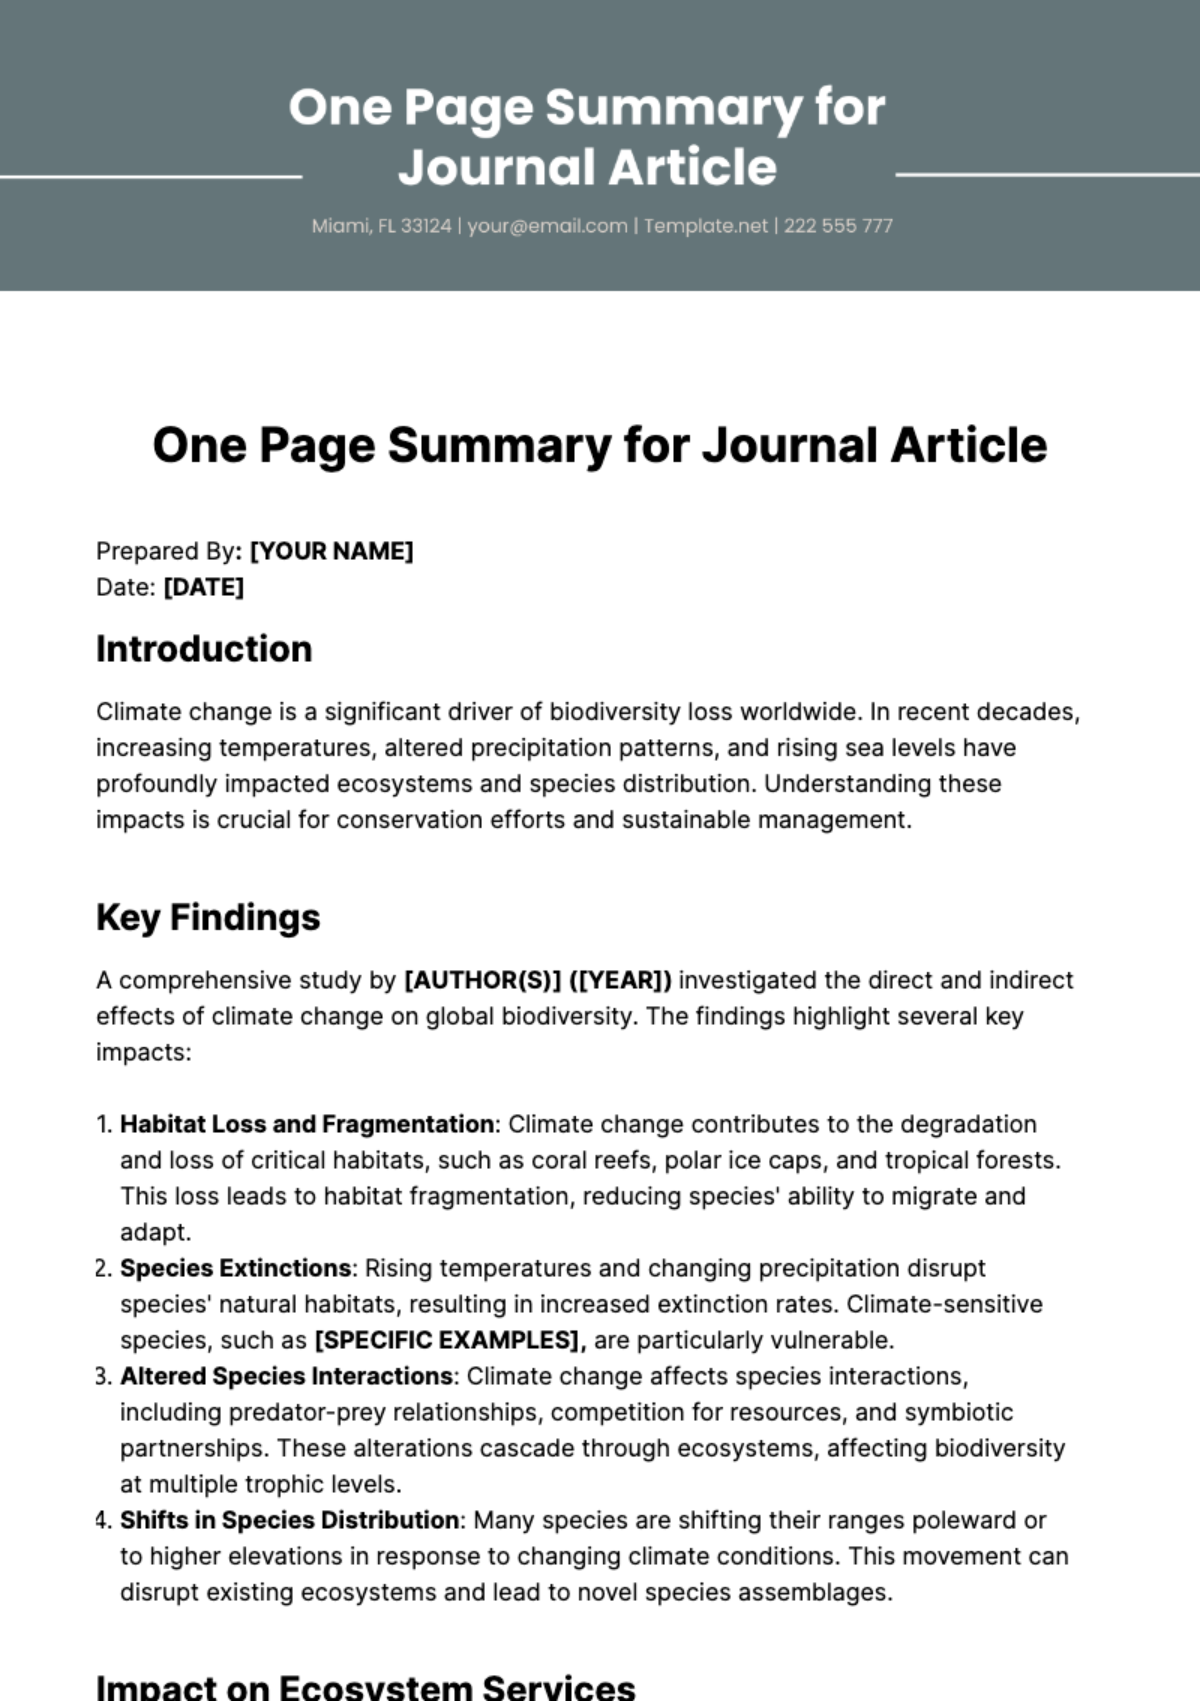 Free One Page Summary for Journal Article Template